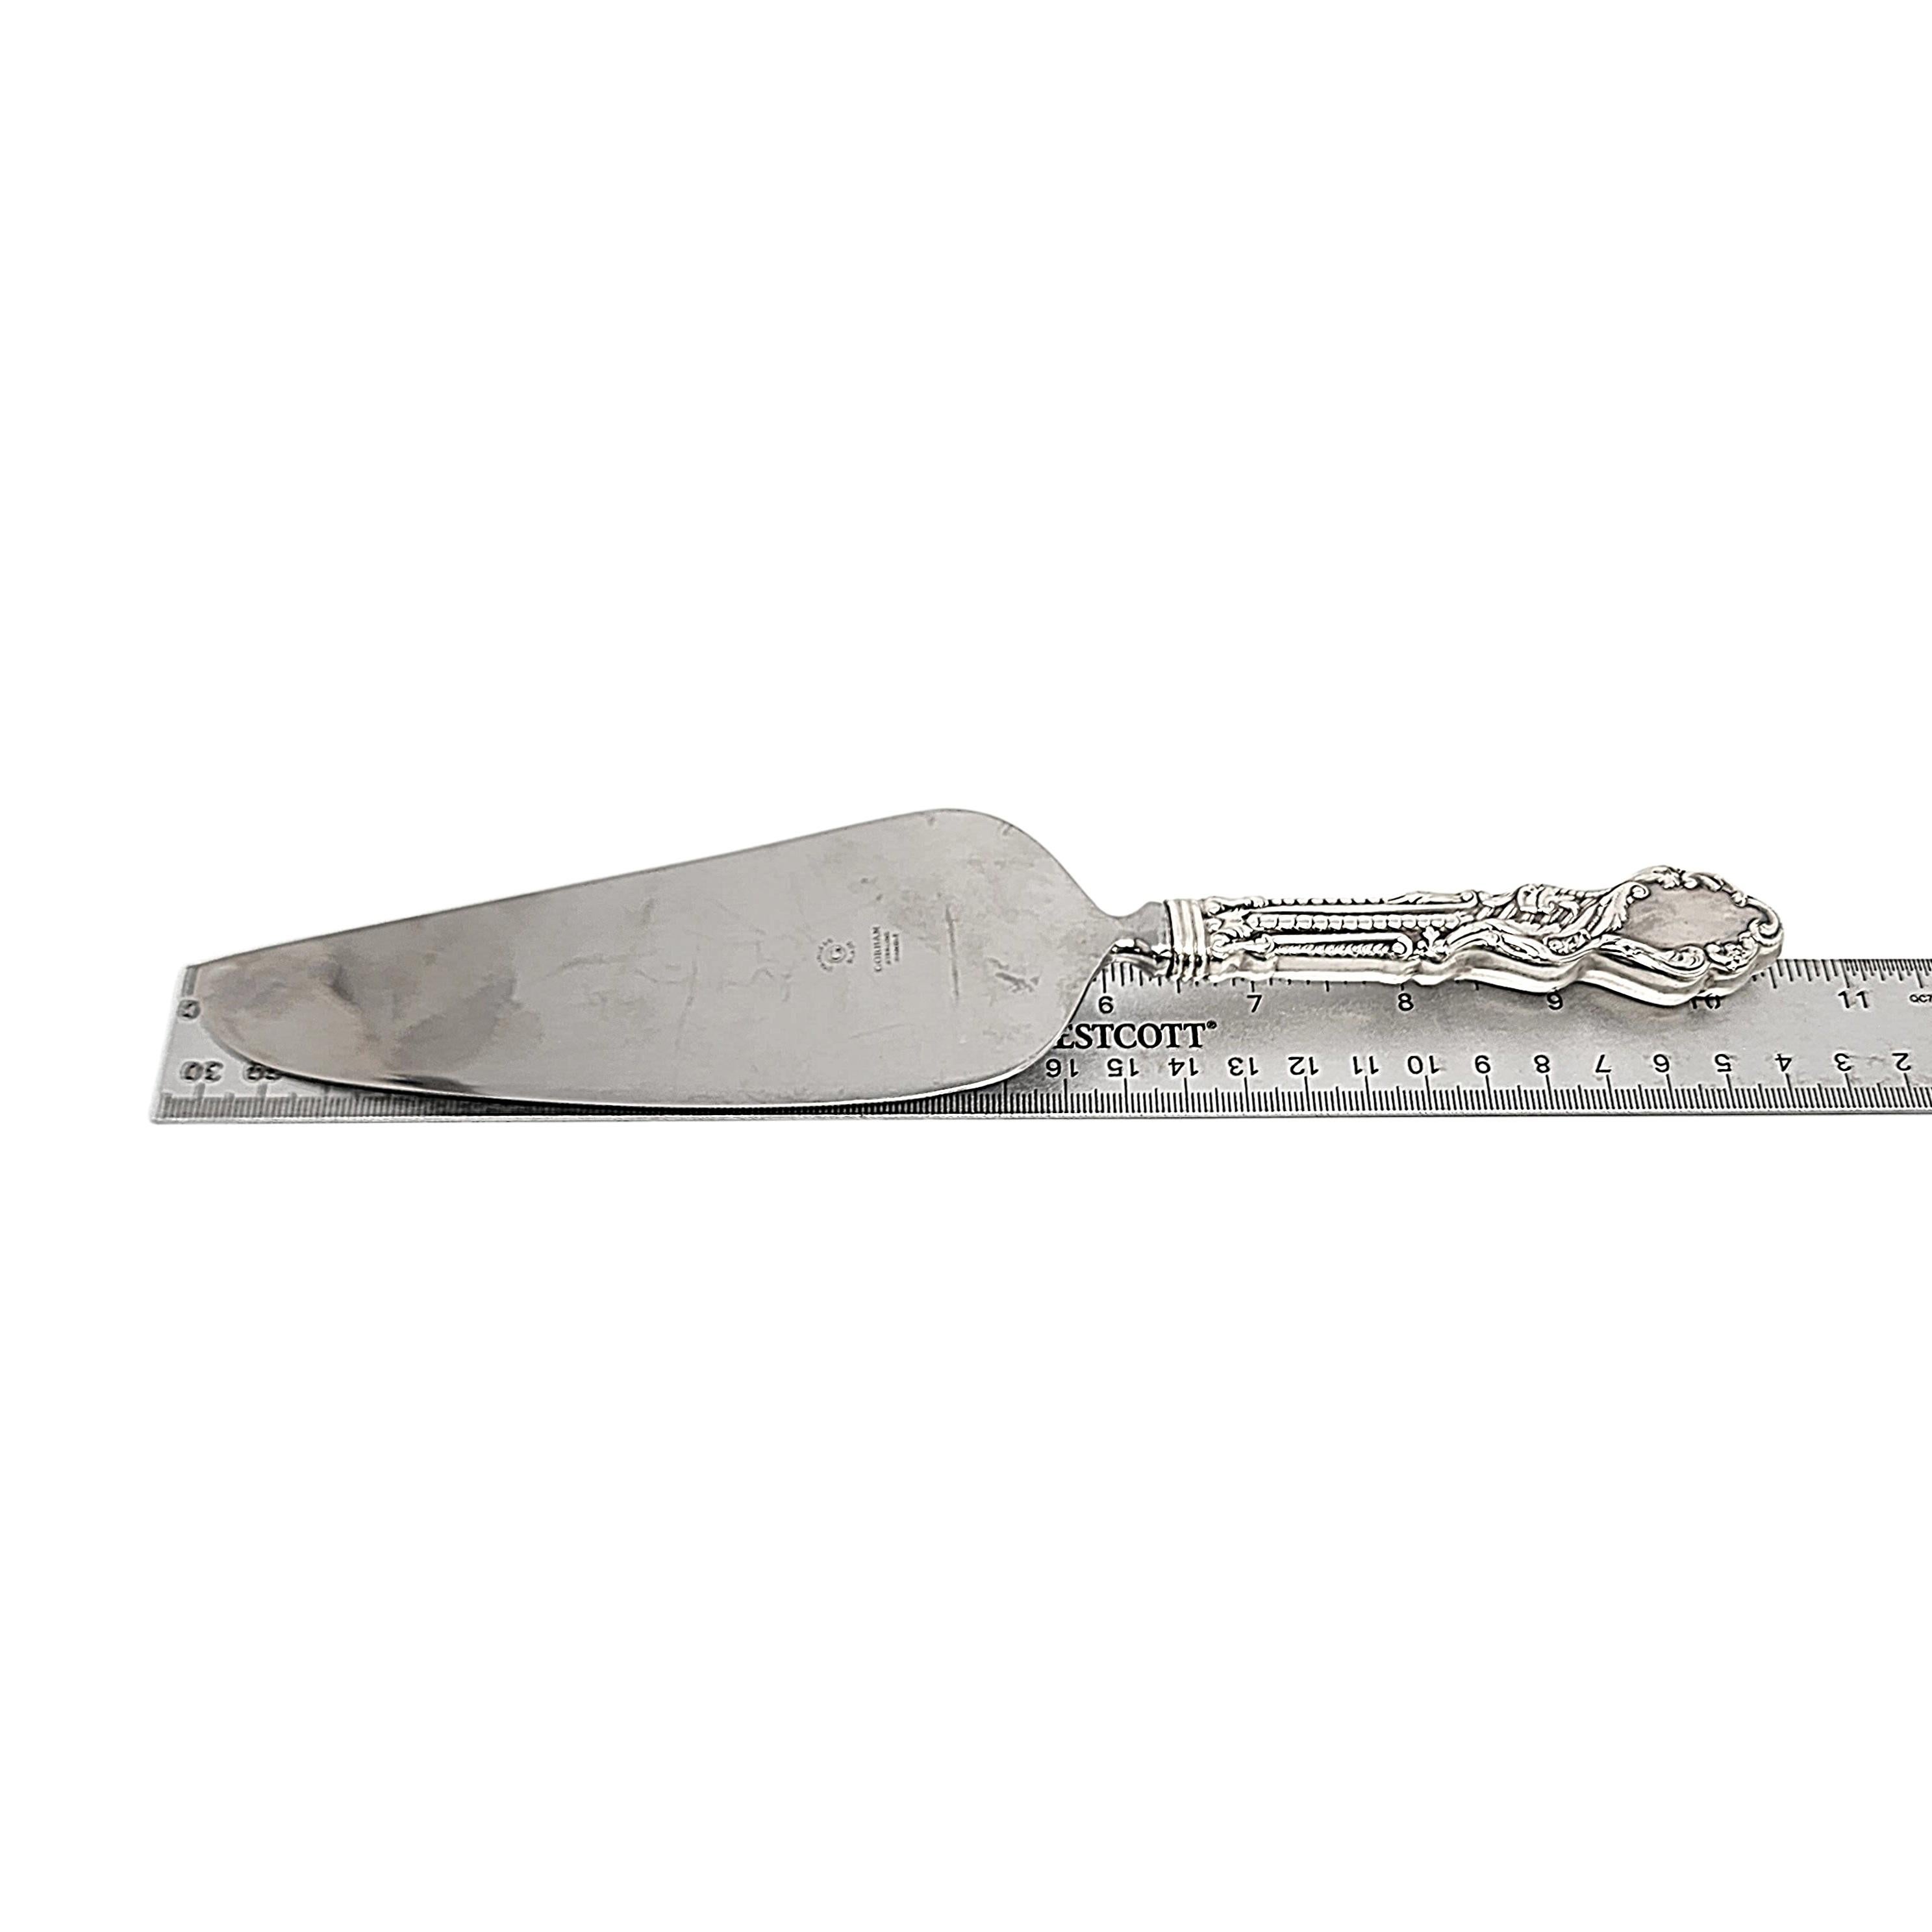 Sterling silver handle with stainless blade pie server by Gorham in the Versailles pattern.

No monogram

Gorham's Versailles is a multi motif pattern designed by Antoine Heller in 1885. Named for the Palace of Versailles, the pattern depicts ornate